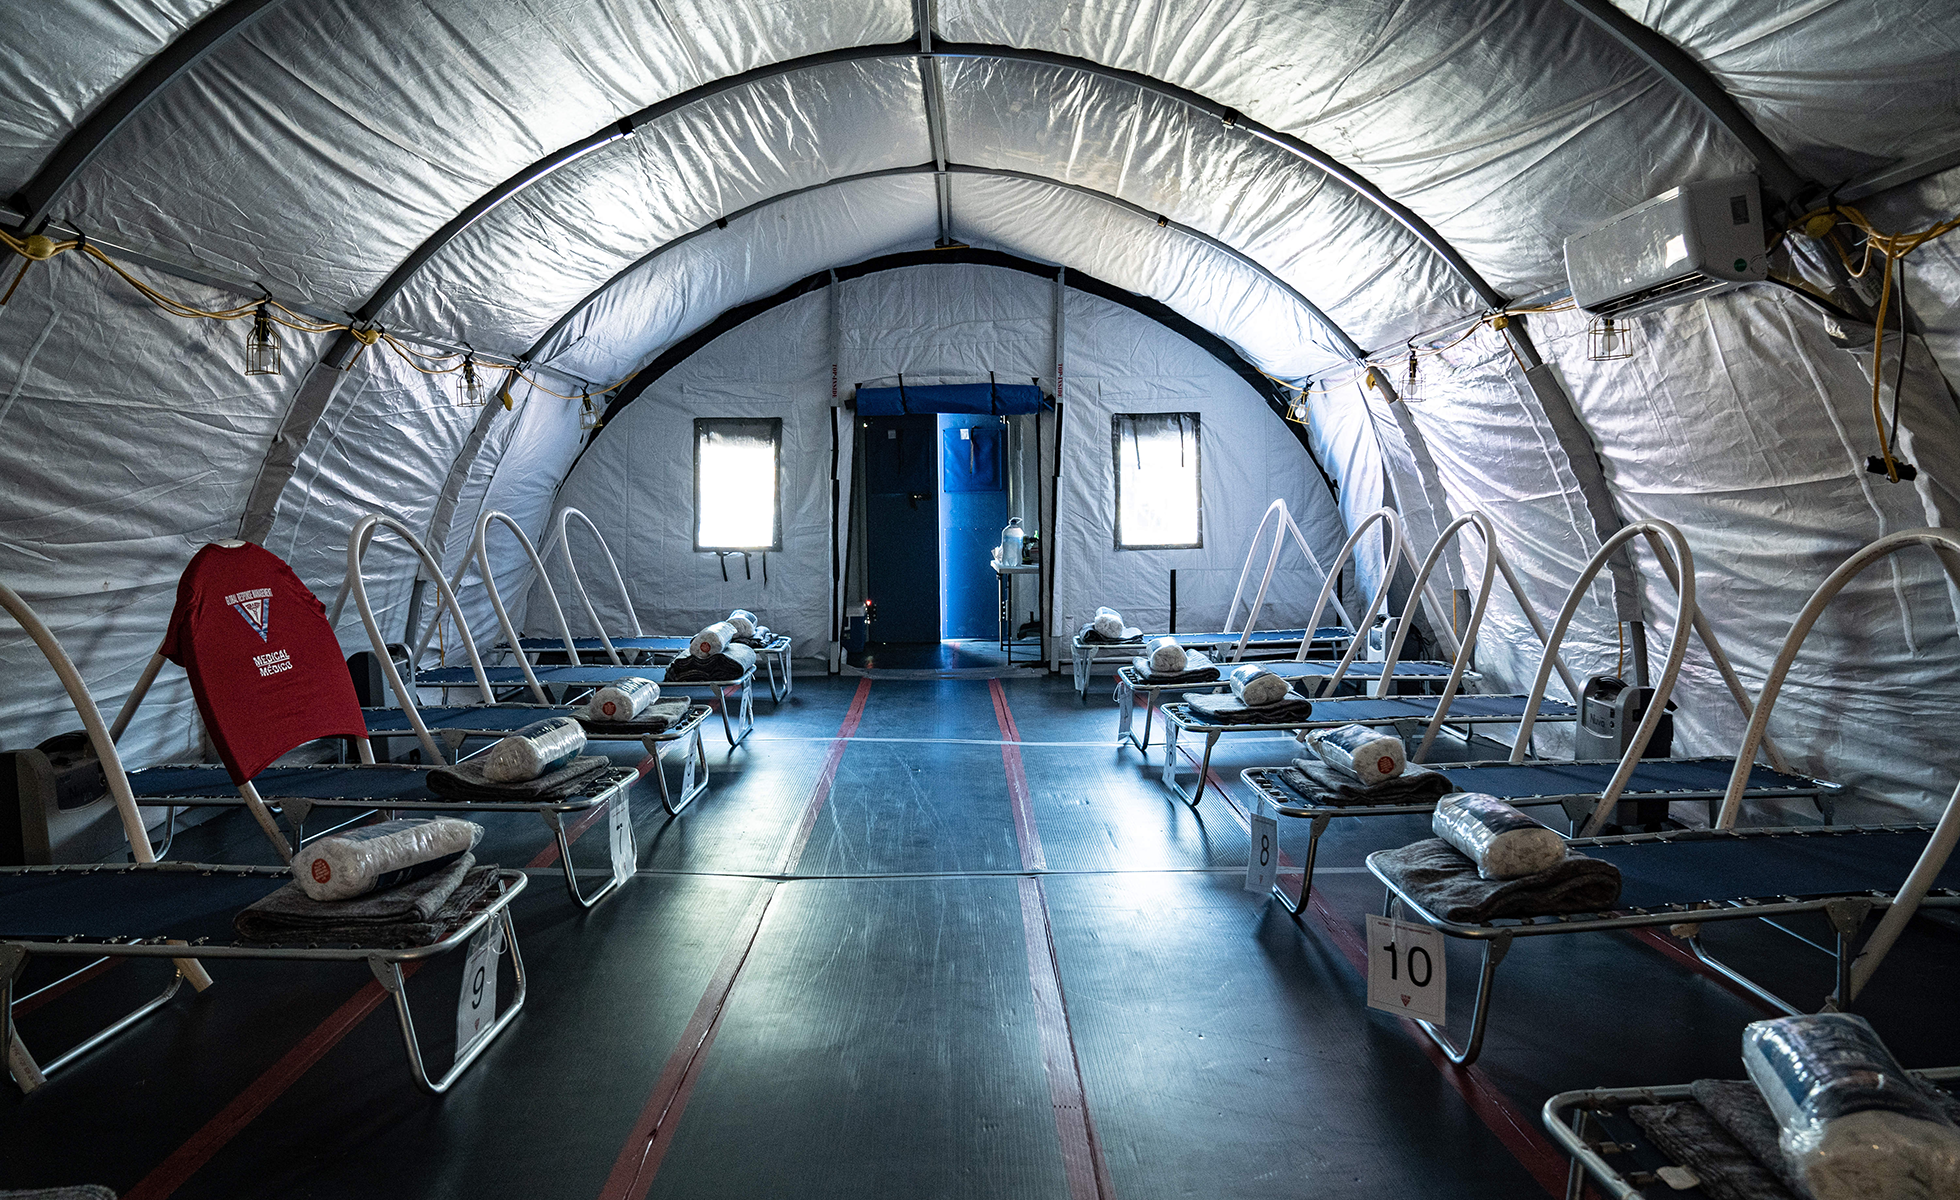 The field hospital at the camp in Matamoros.